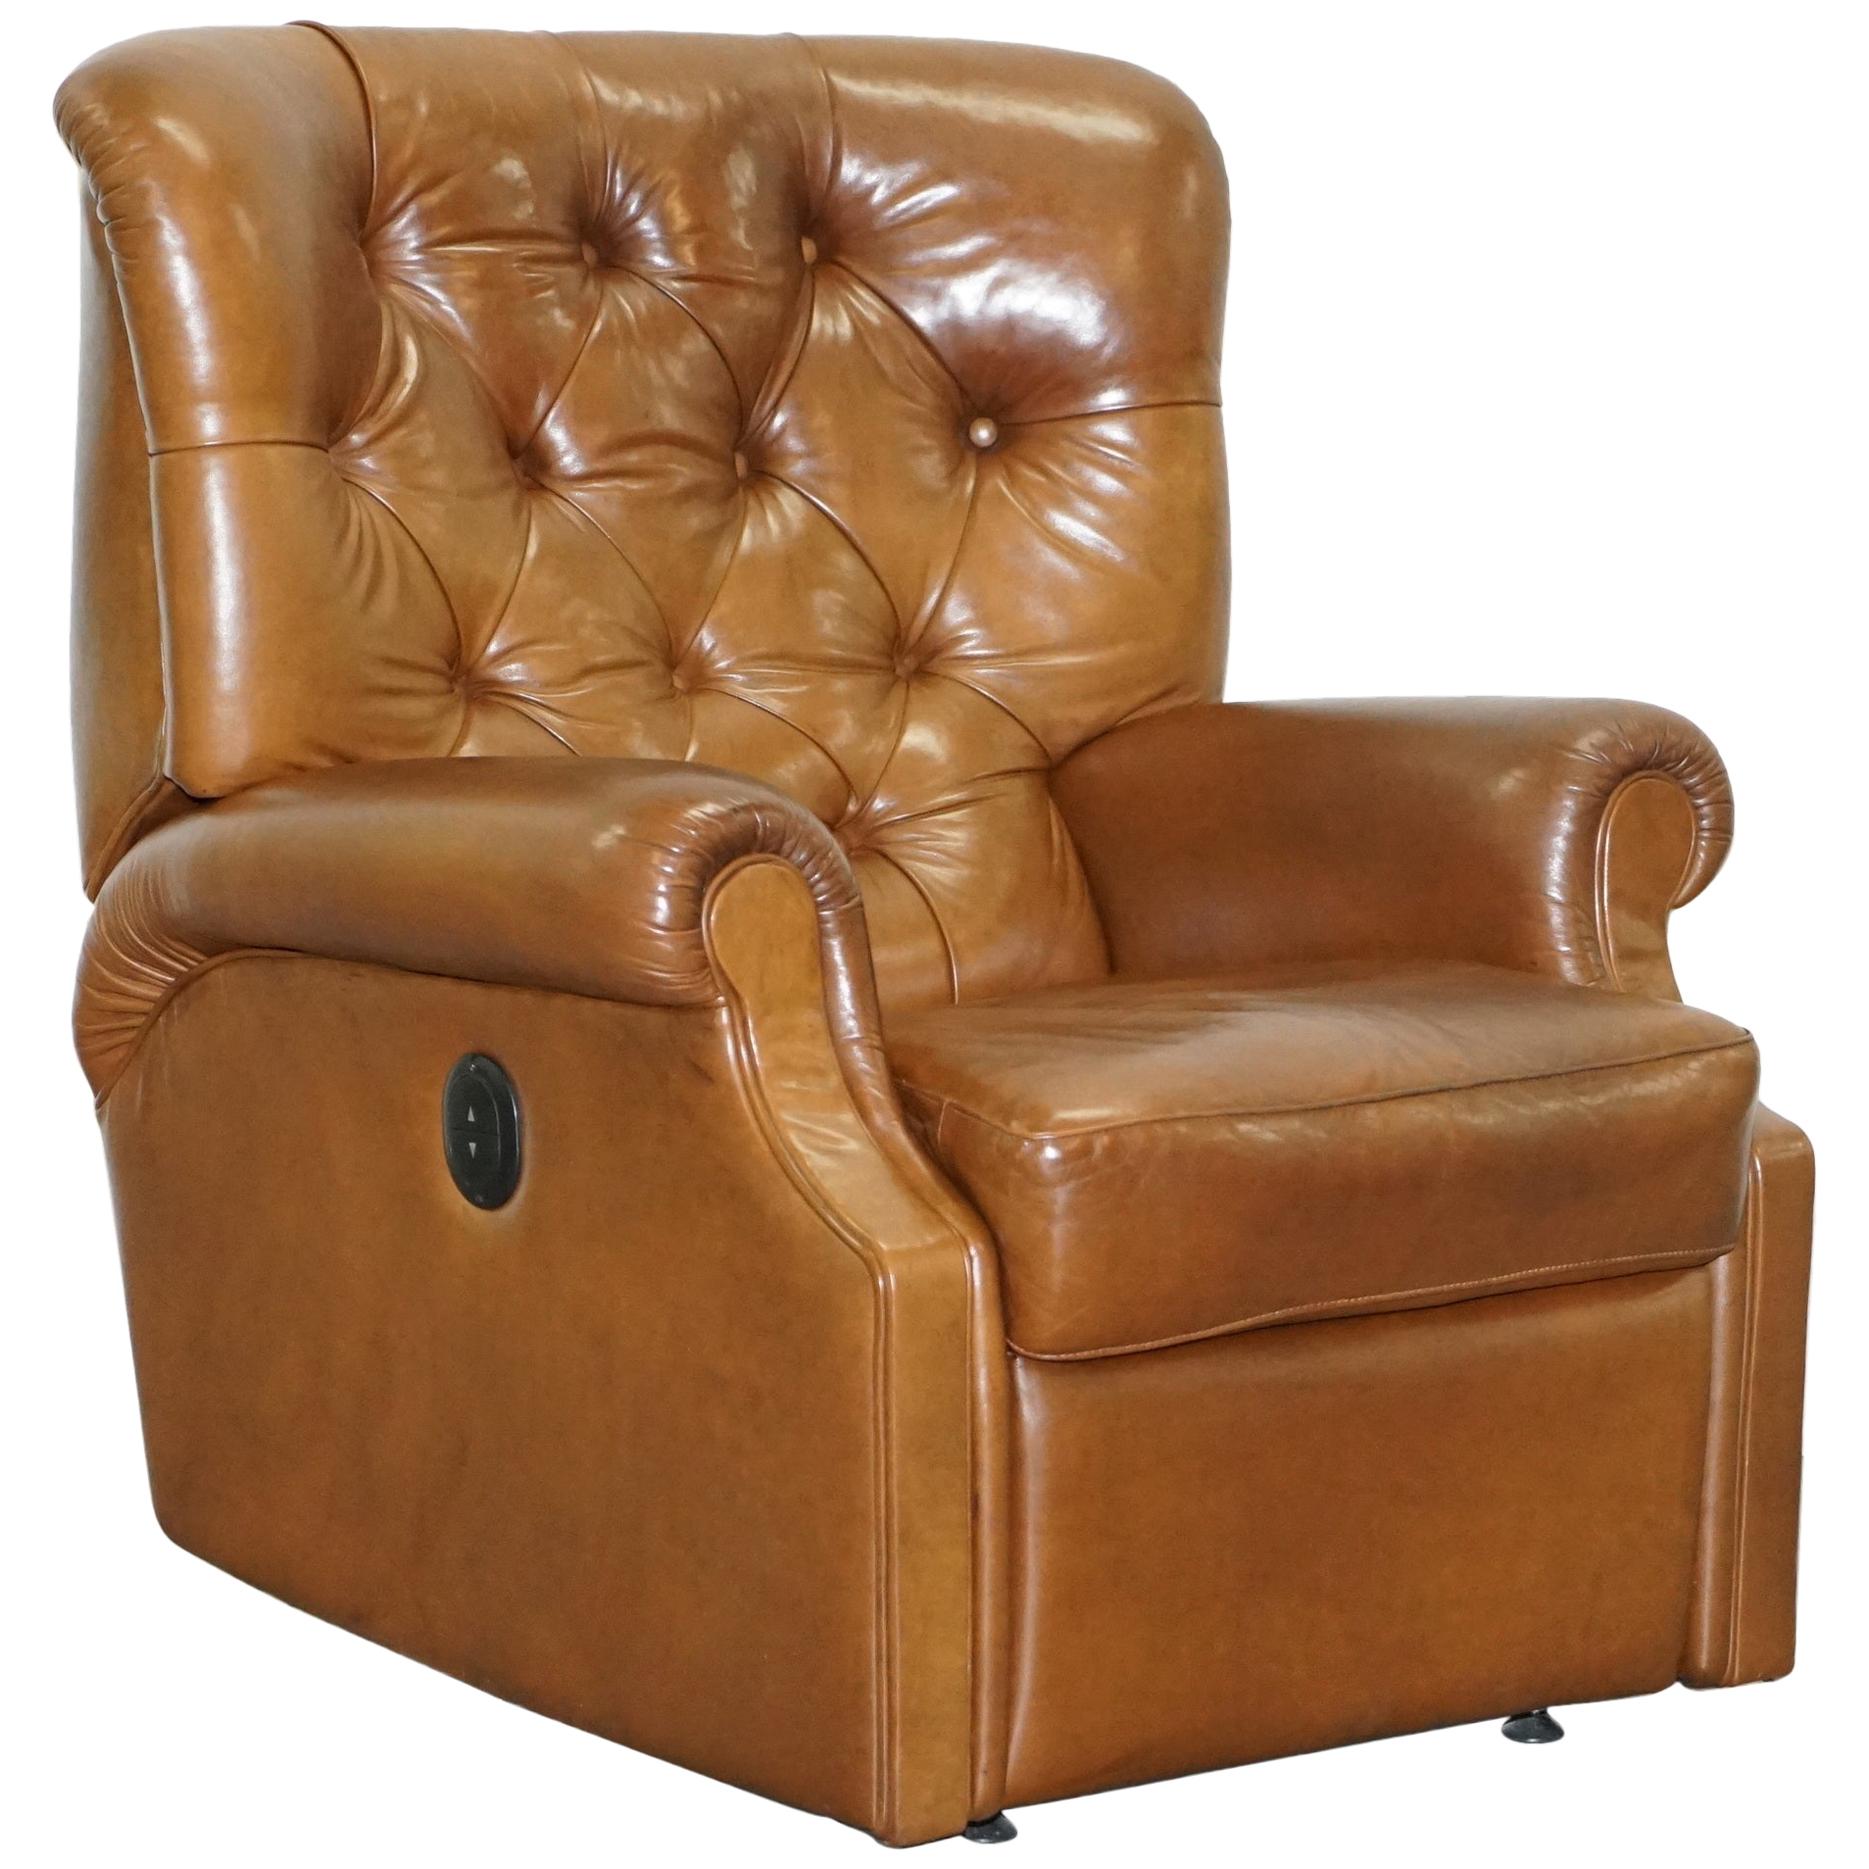 Lovely Tan Brown Leather Chesterfield Electric Relciner Armchair Comfortable!!!!